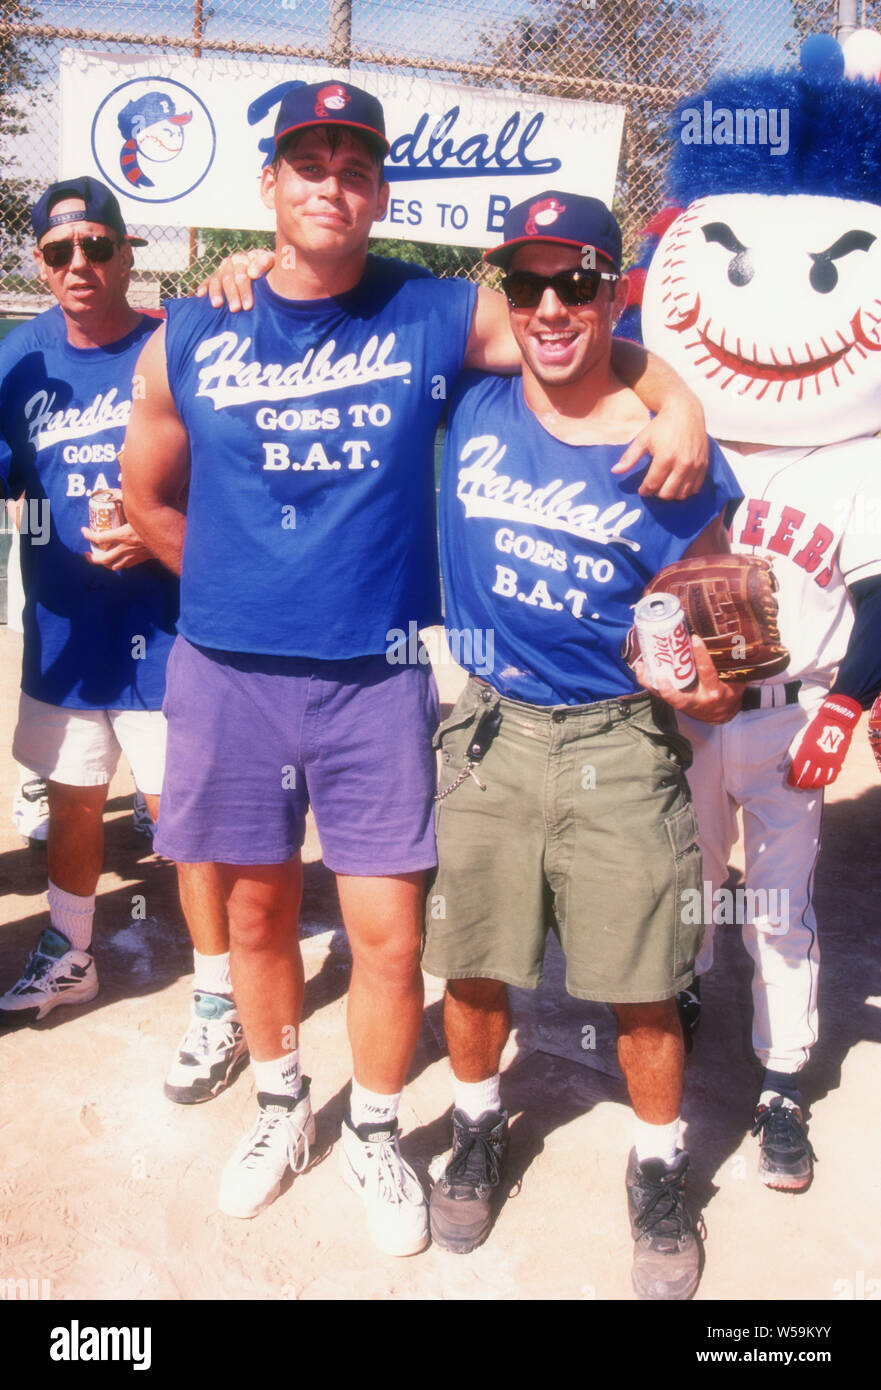 Los Angeles, California, USA 12th October 1994 Actor Chris Browning and Comedian/actor Joe Rogan attend Hardball Goes To B.A.T. baseball game on October 12, 1994 in Los Angeles, California, USA. Photo by Barry King/Alamy Stock Photo Stock Photo